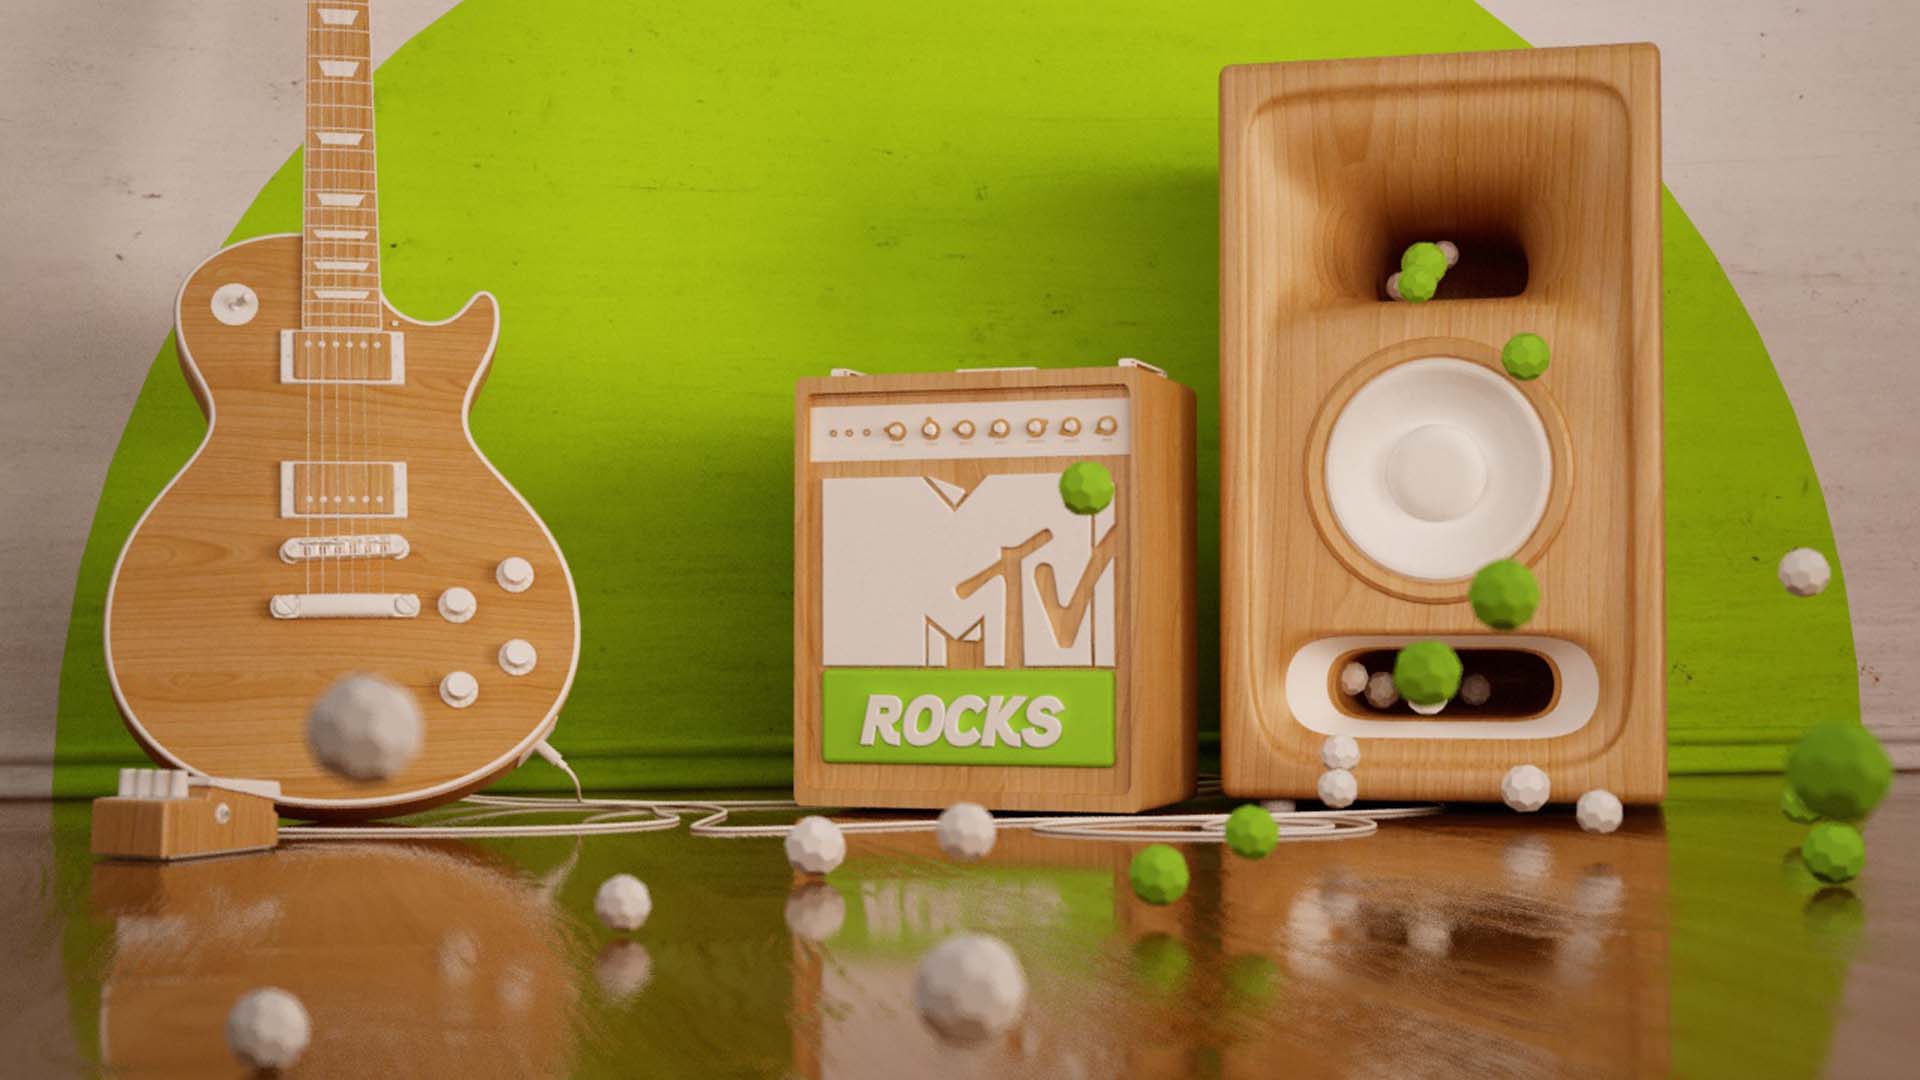 design-motion-3d-photography-octane-redshift-vray-art-visual-animation-render-style-graphic-digital-mtv-music-pop-wood-clay-bump-spot-tv-guitar-rock-green-stereo-elettric-setdesign